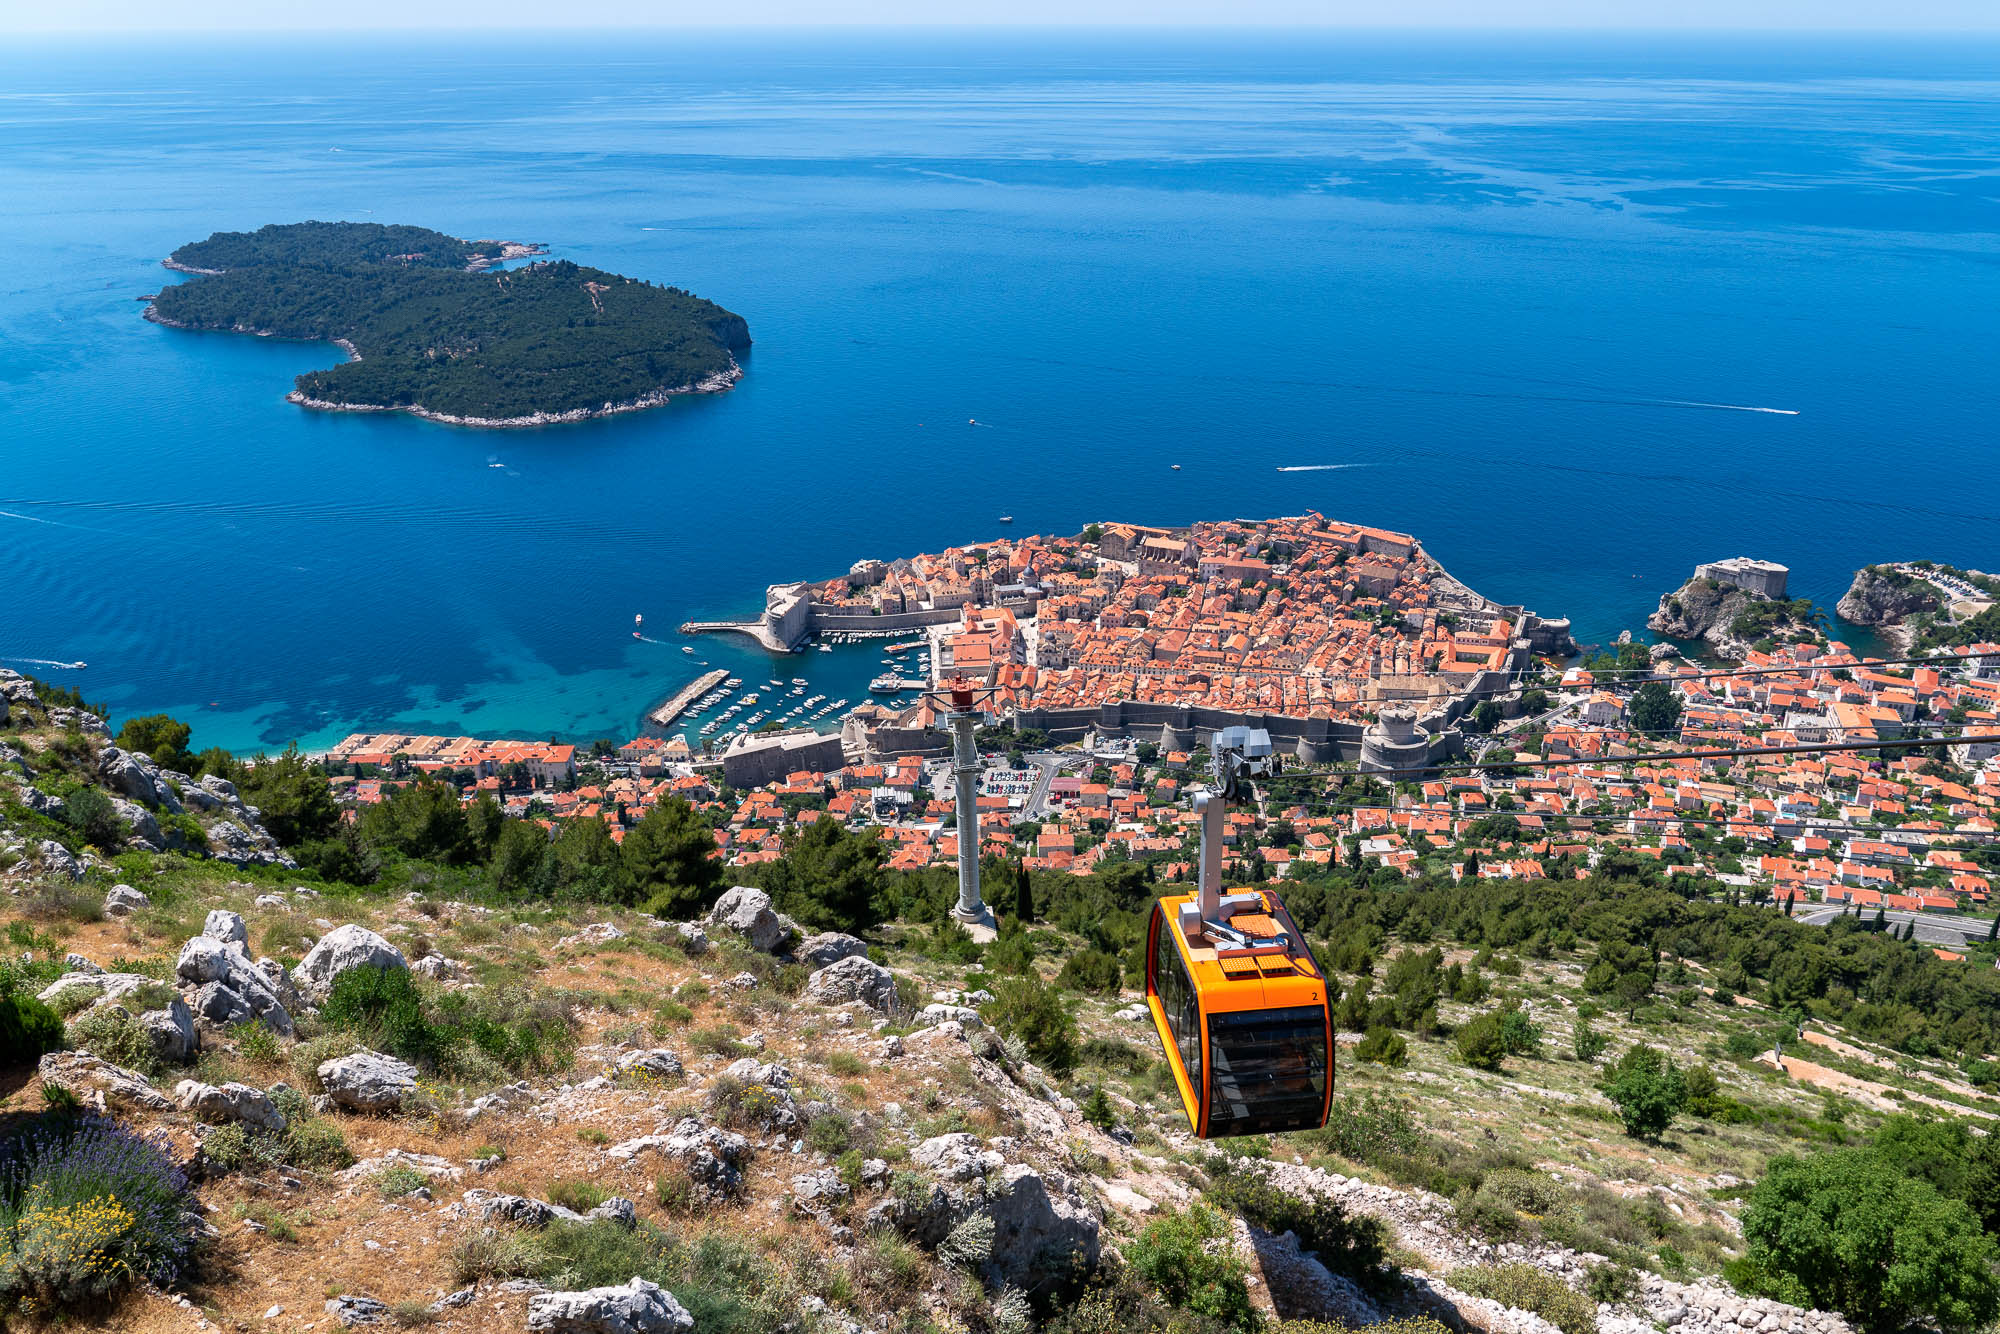 An aerial cable car descends towards a coastal city with orange roofs, surrounded by blue sea and a wooded island nearby, under a clear sky.